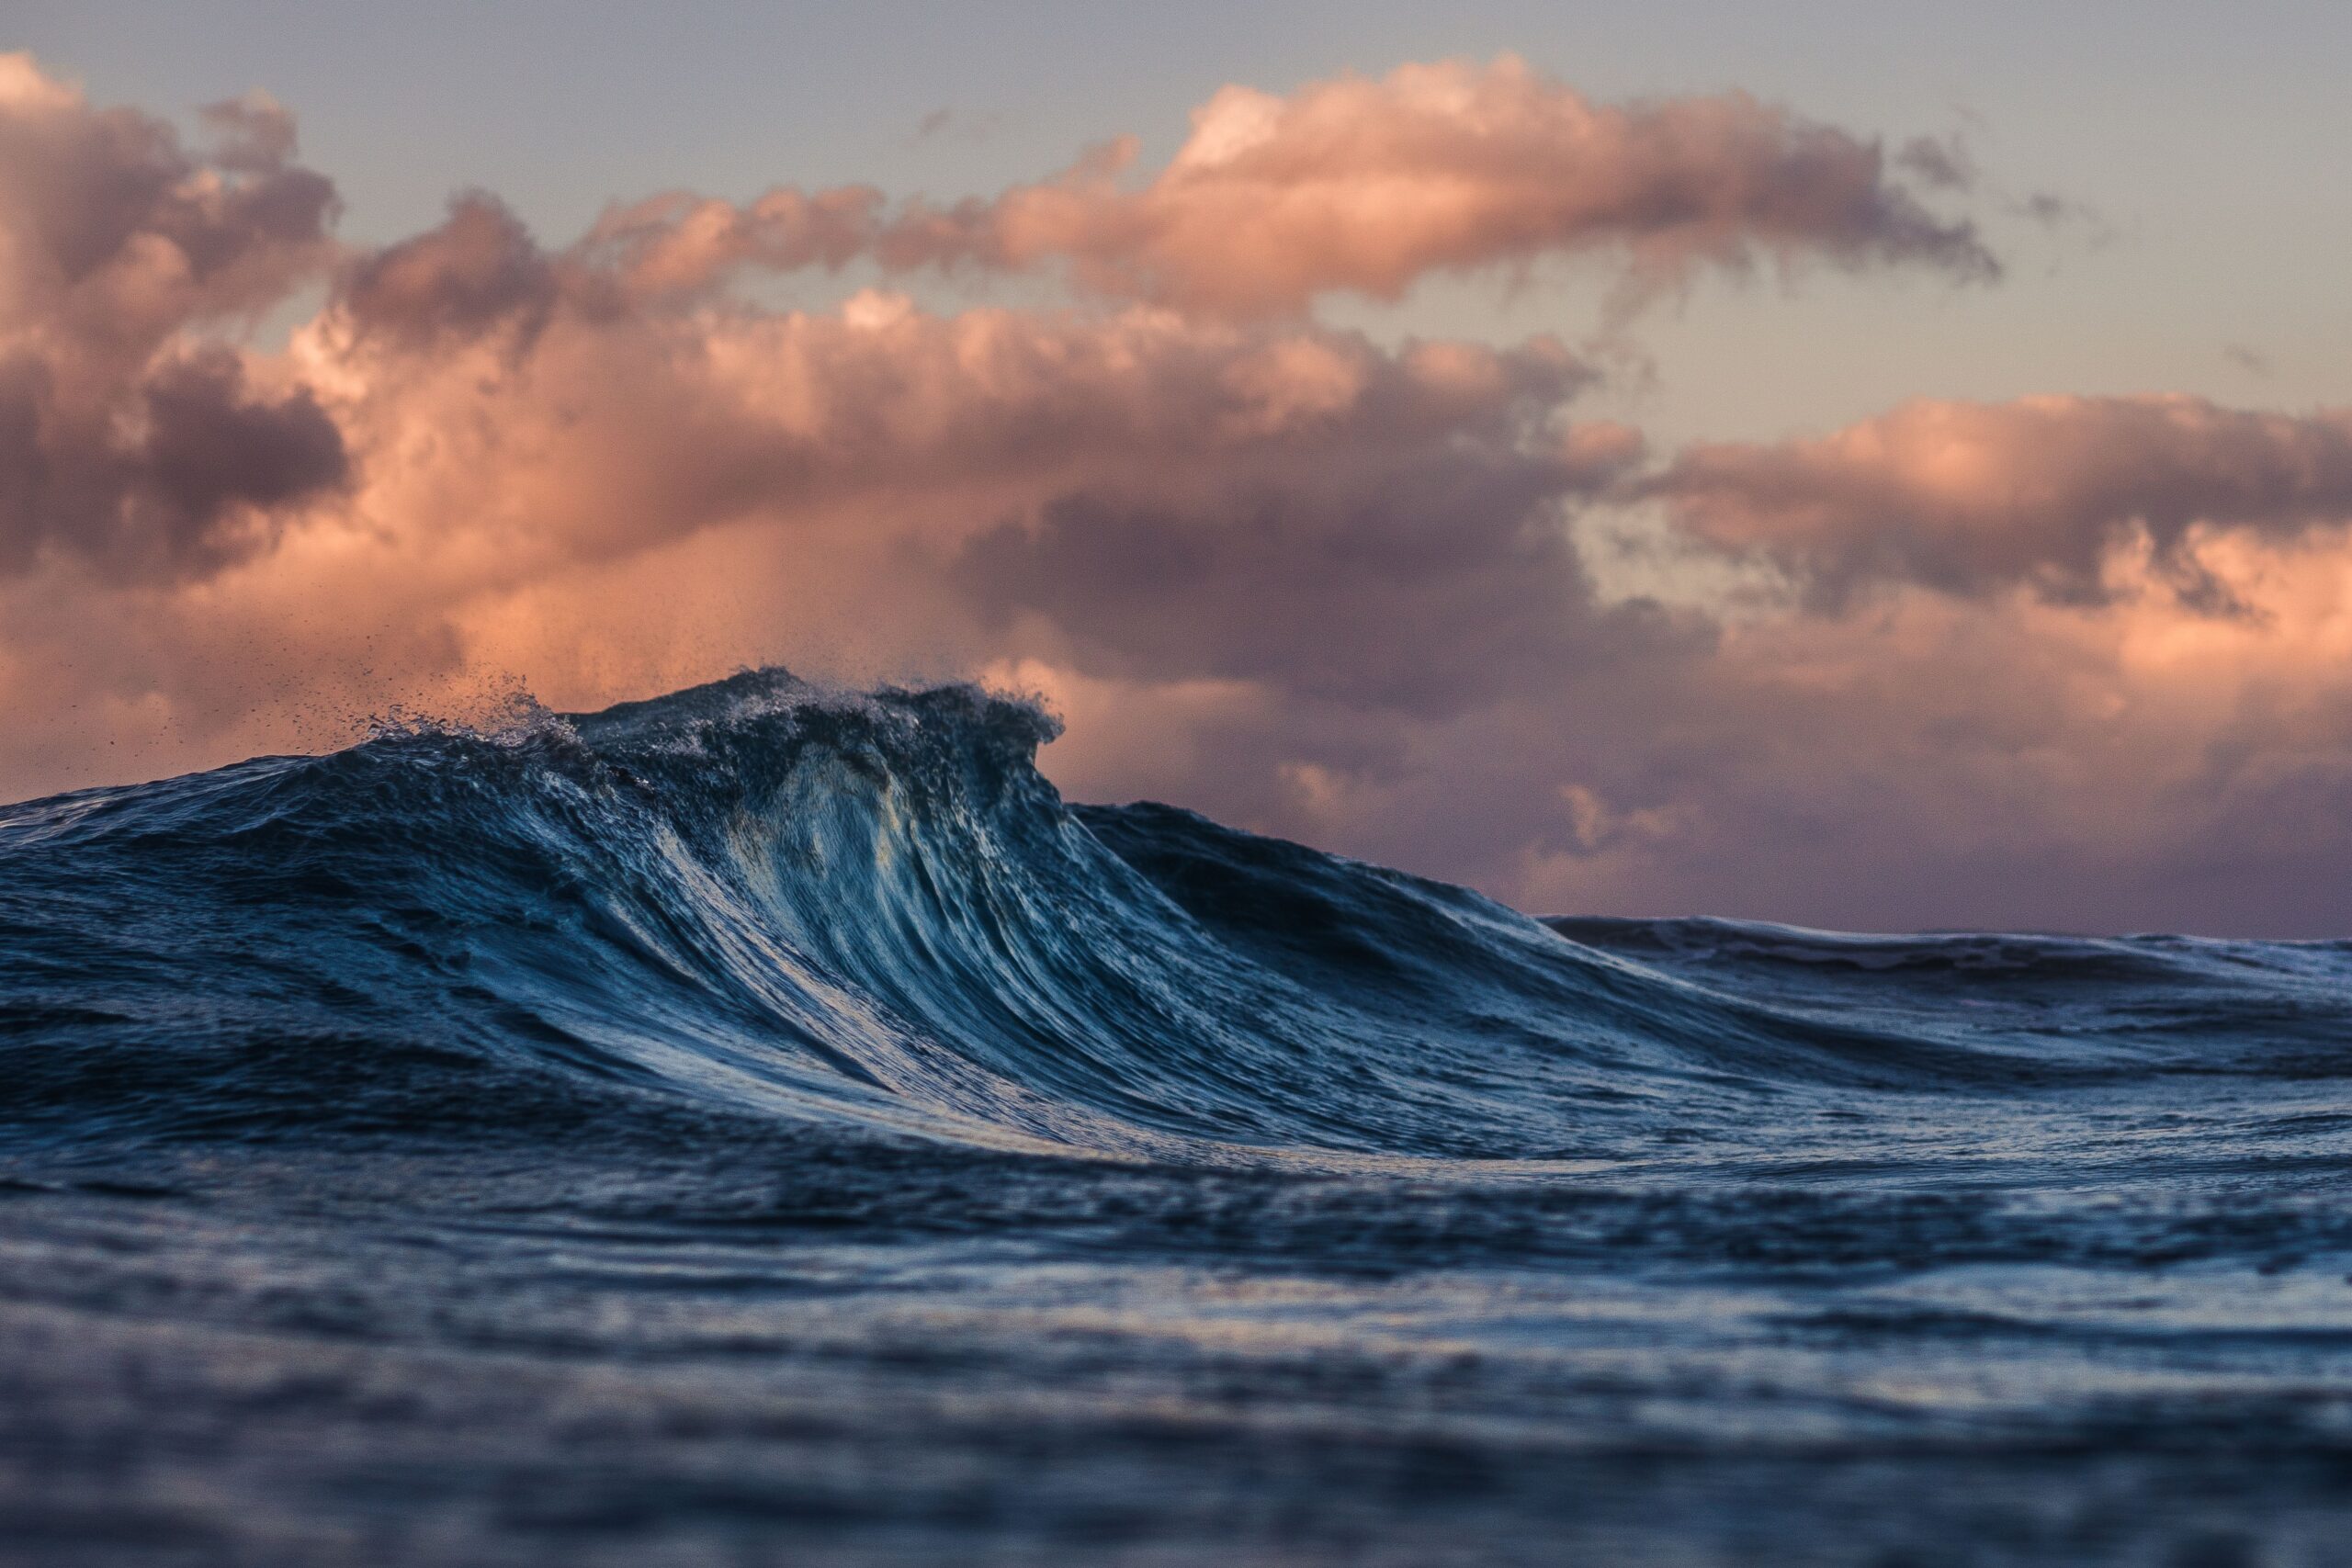 A close up of the peak of a wave that formed with sunset clouds behind it